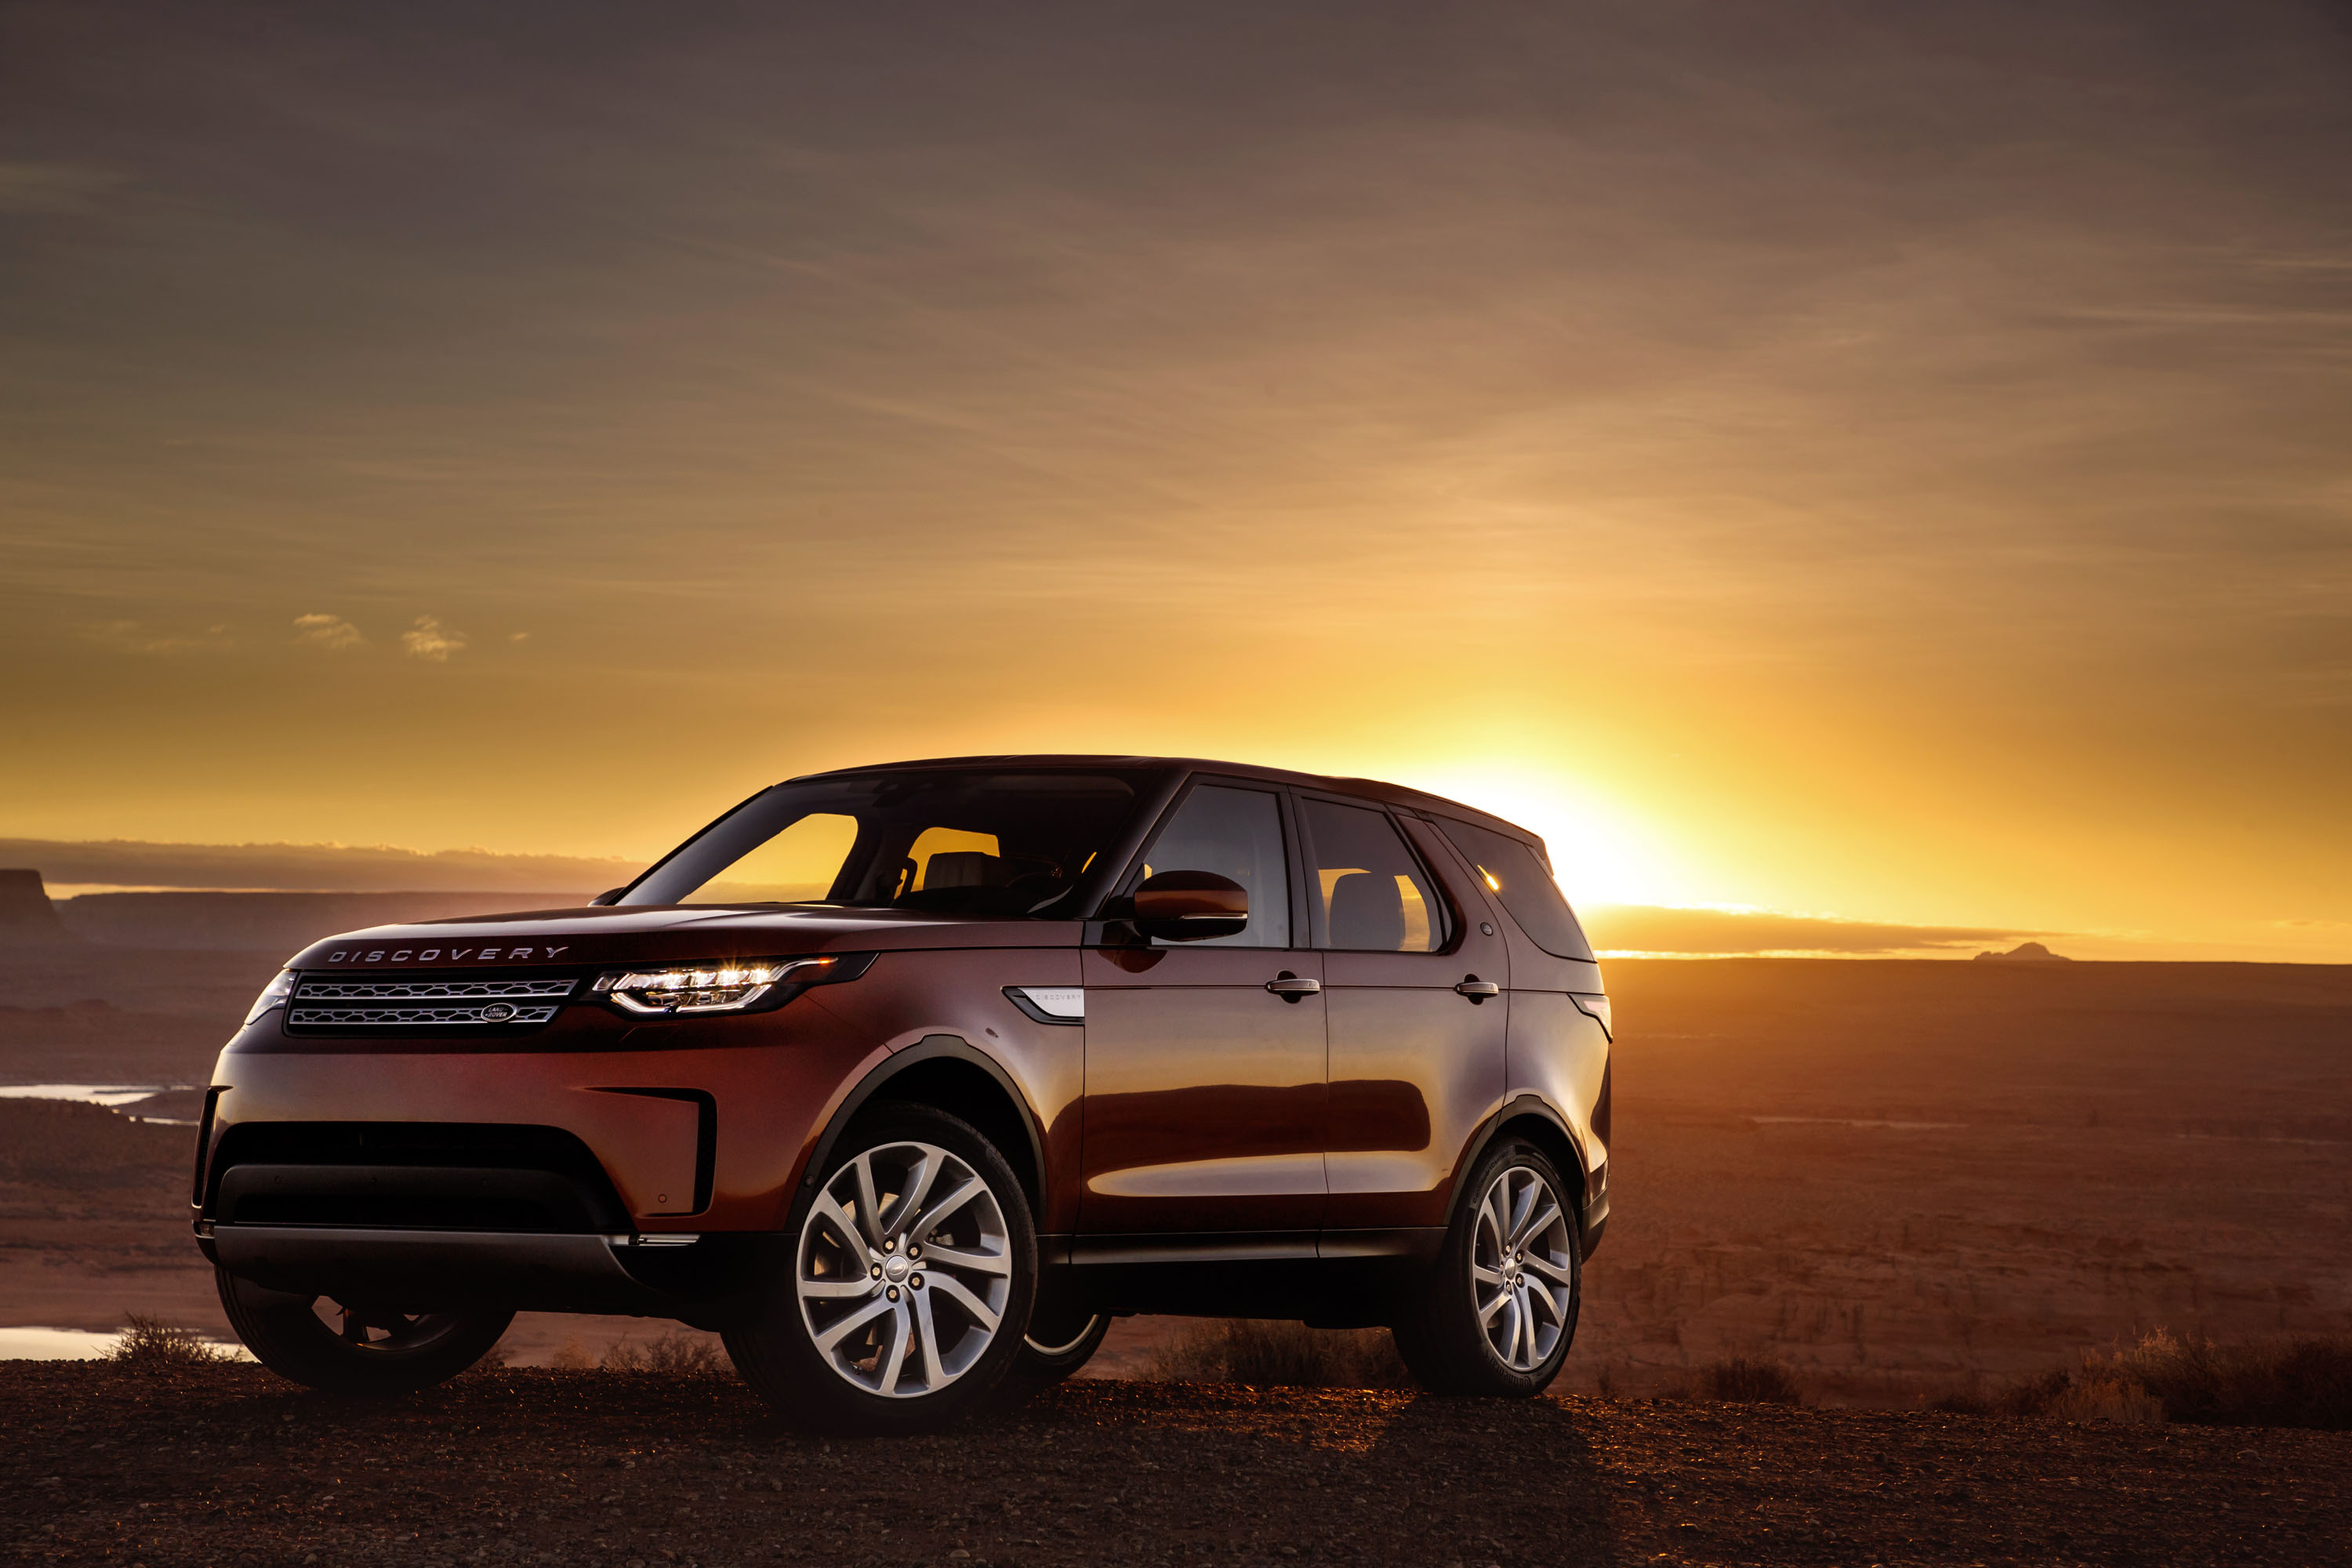 More details on SVO-enhanced Land Rover Discovery